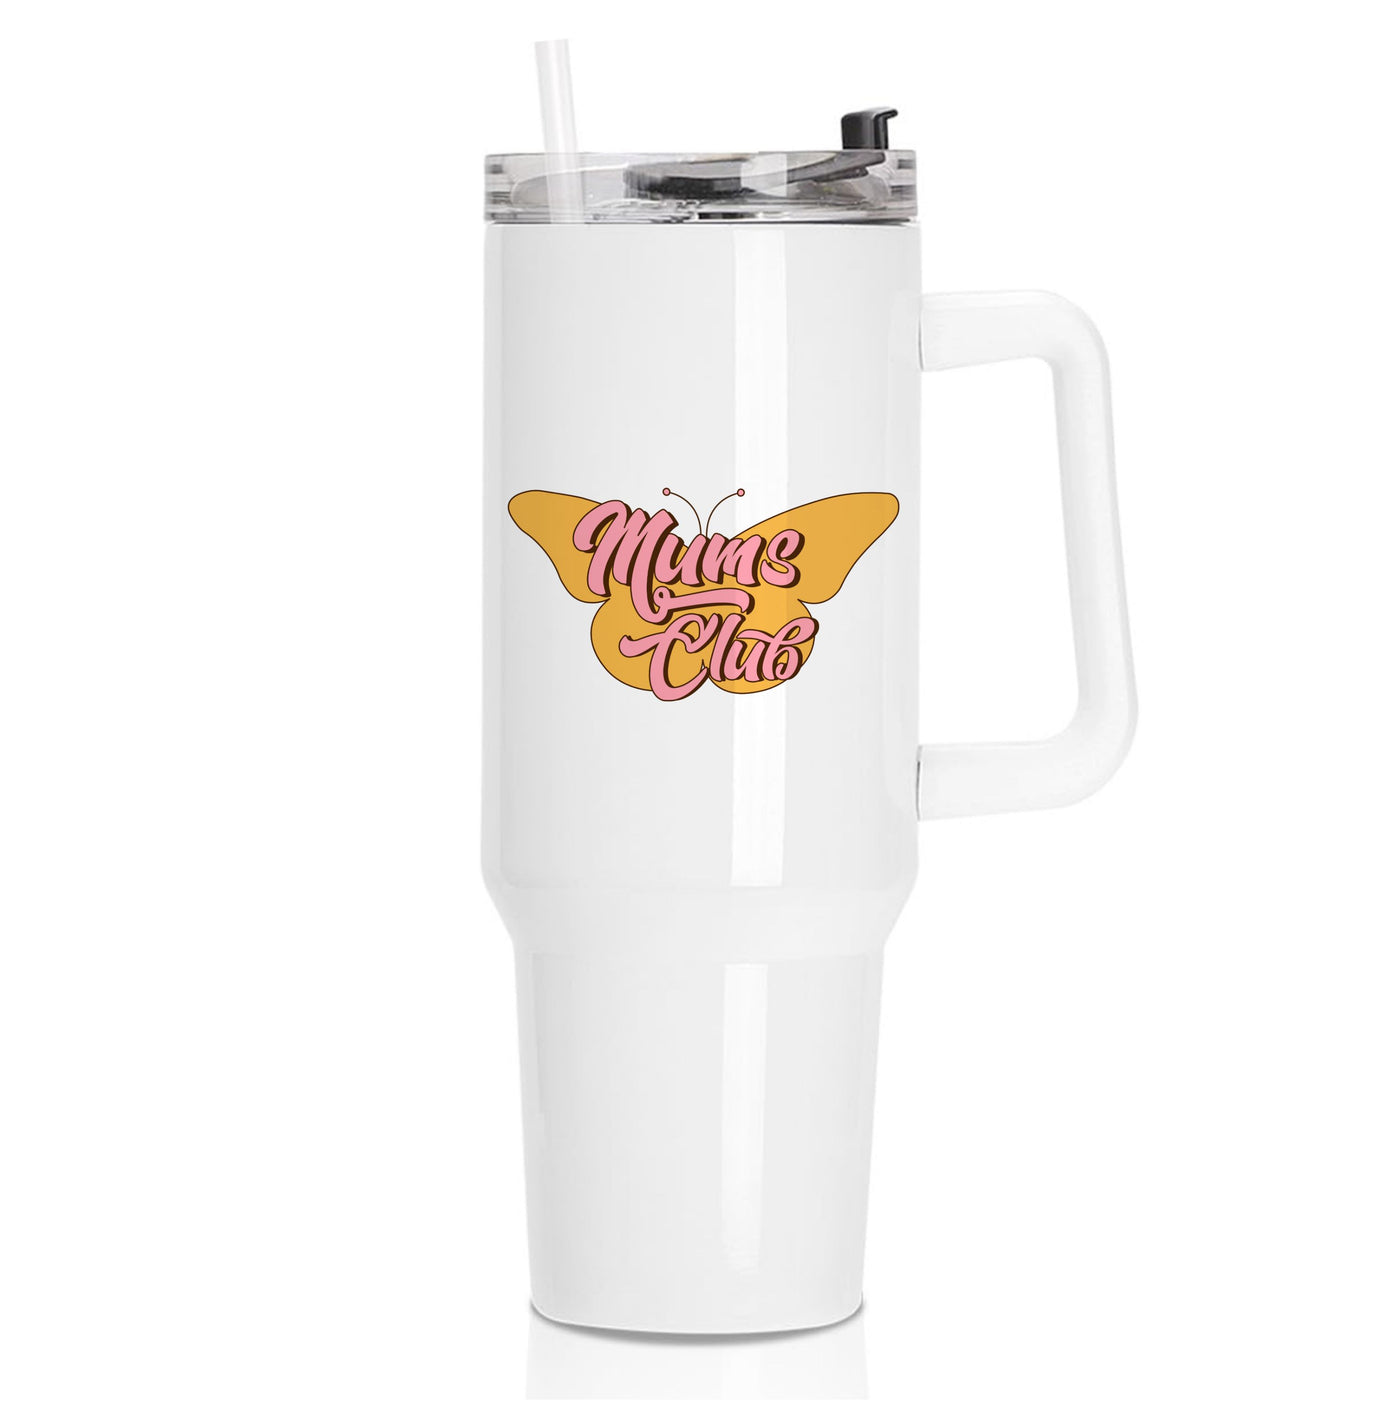 Mums Club - Mothers Day Tumbler